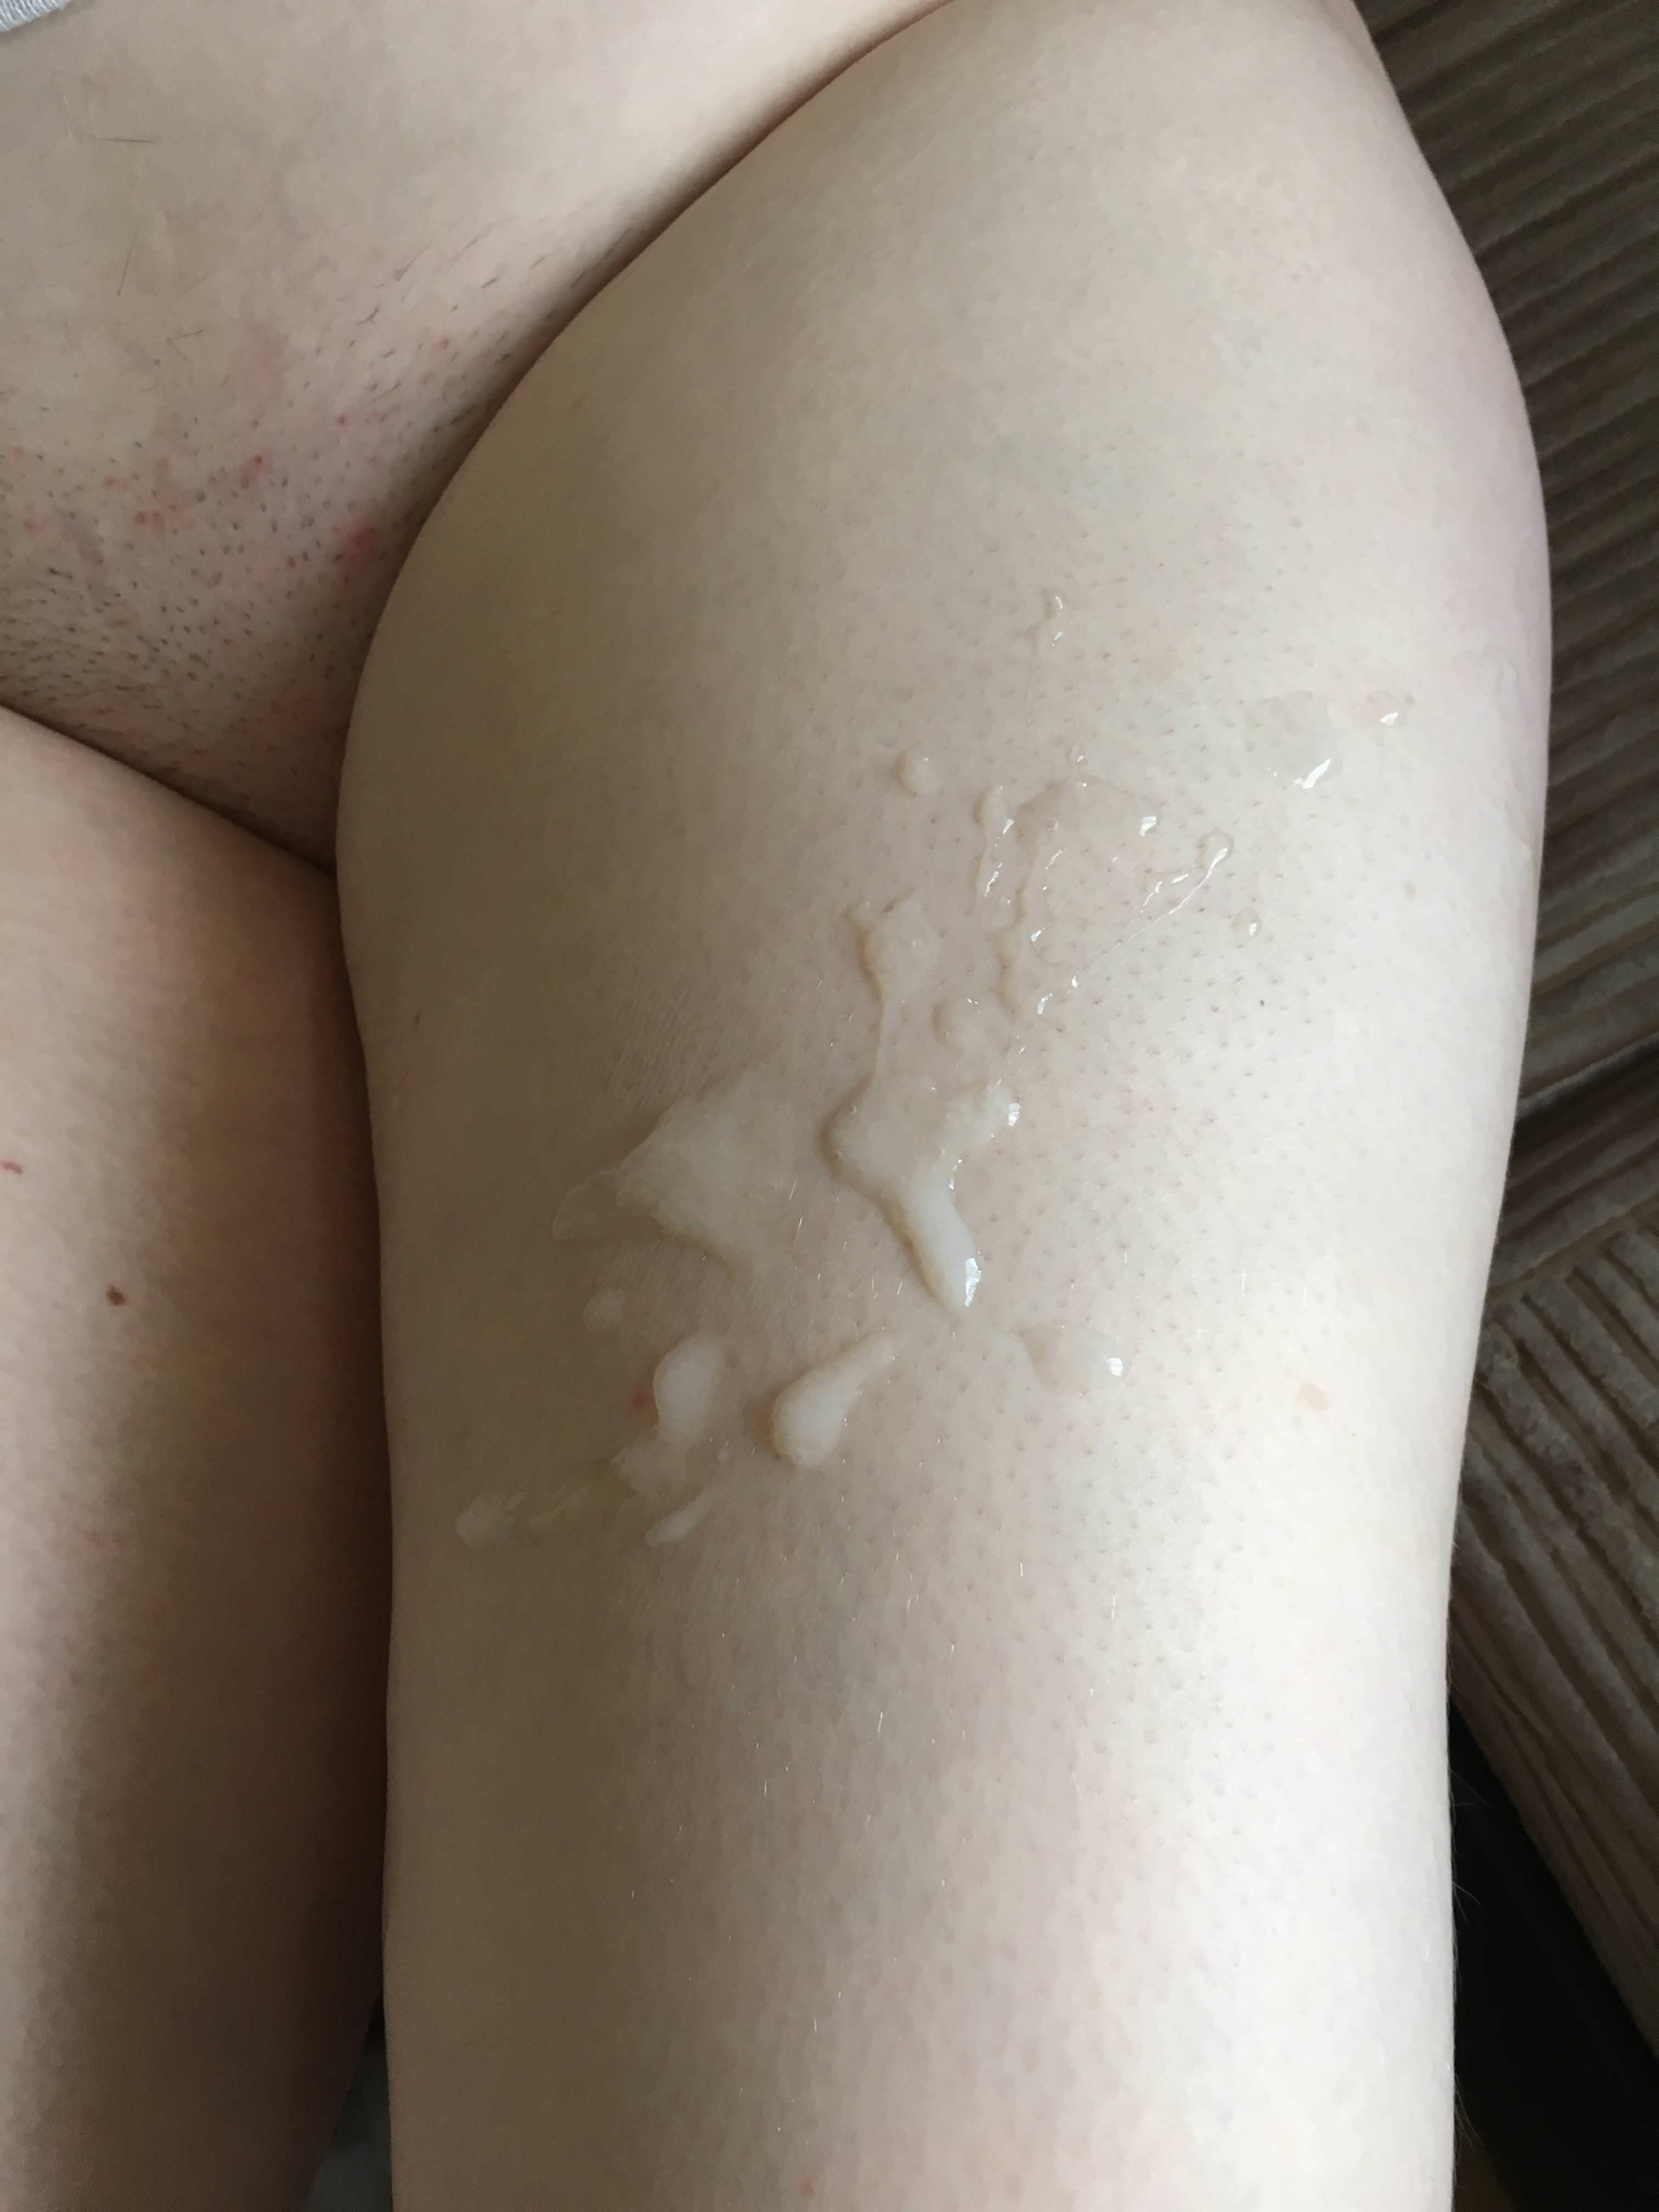 You havent cum on my thigh yet filling in every part of her body each day Porn pic